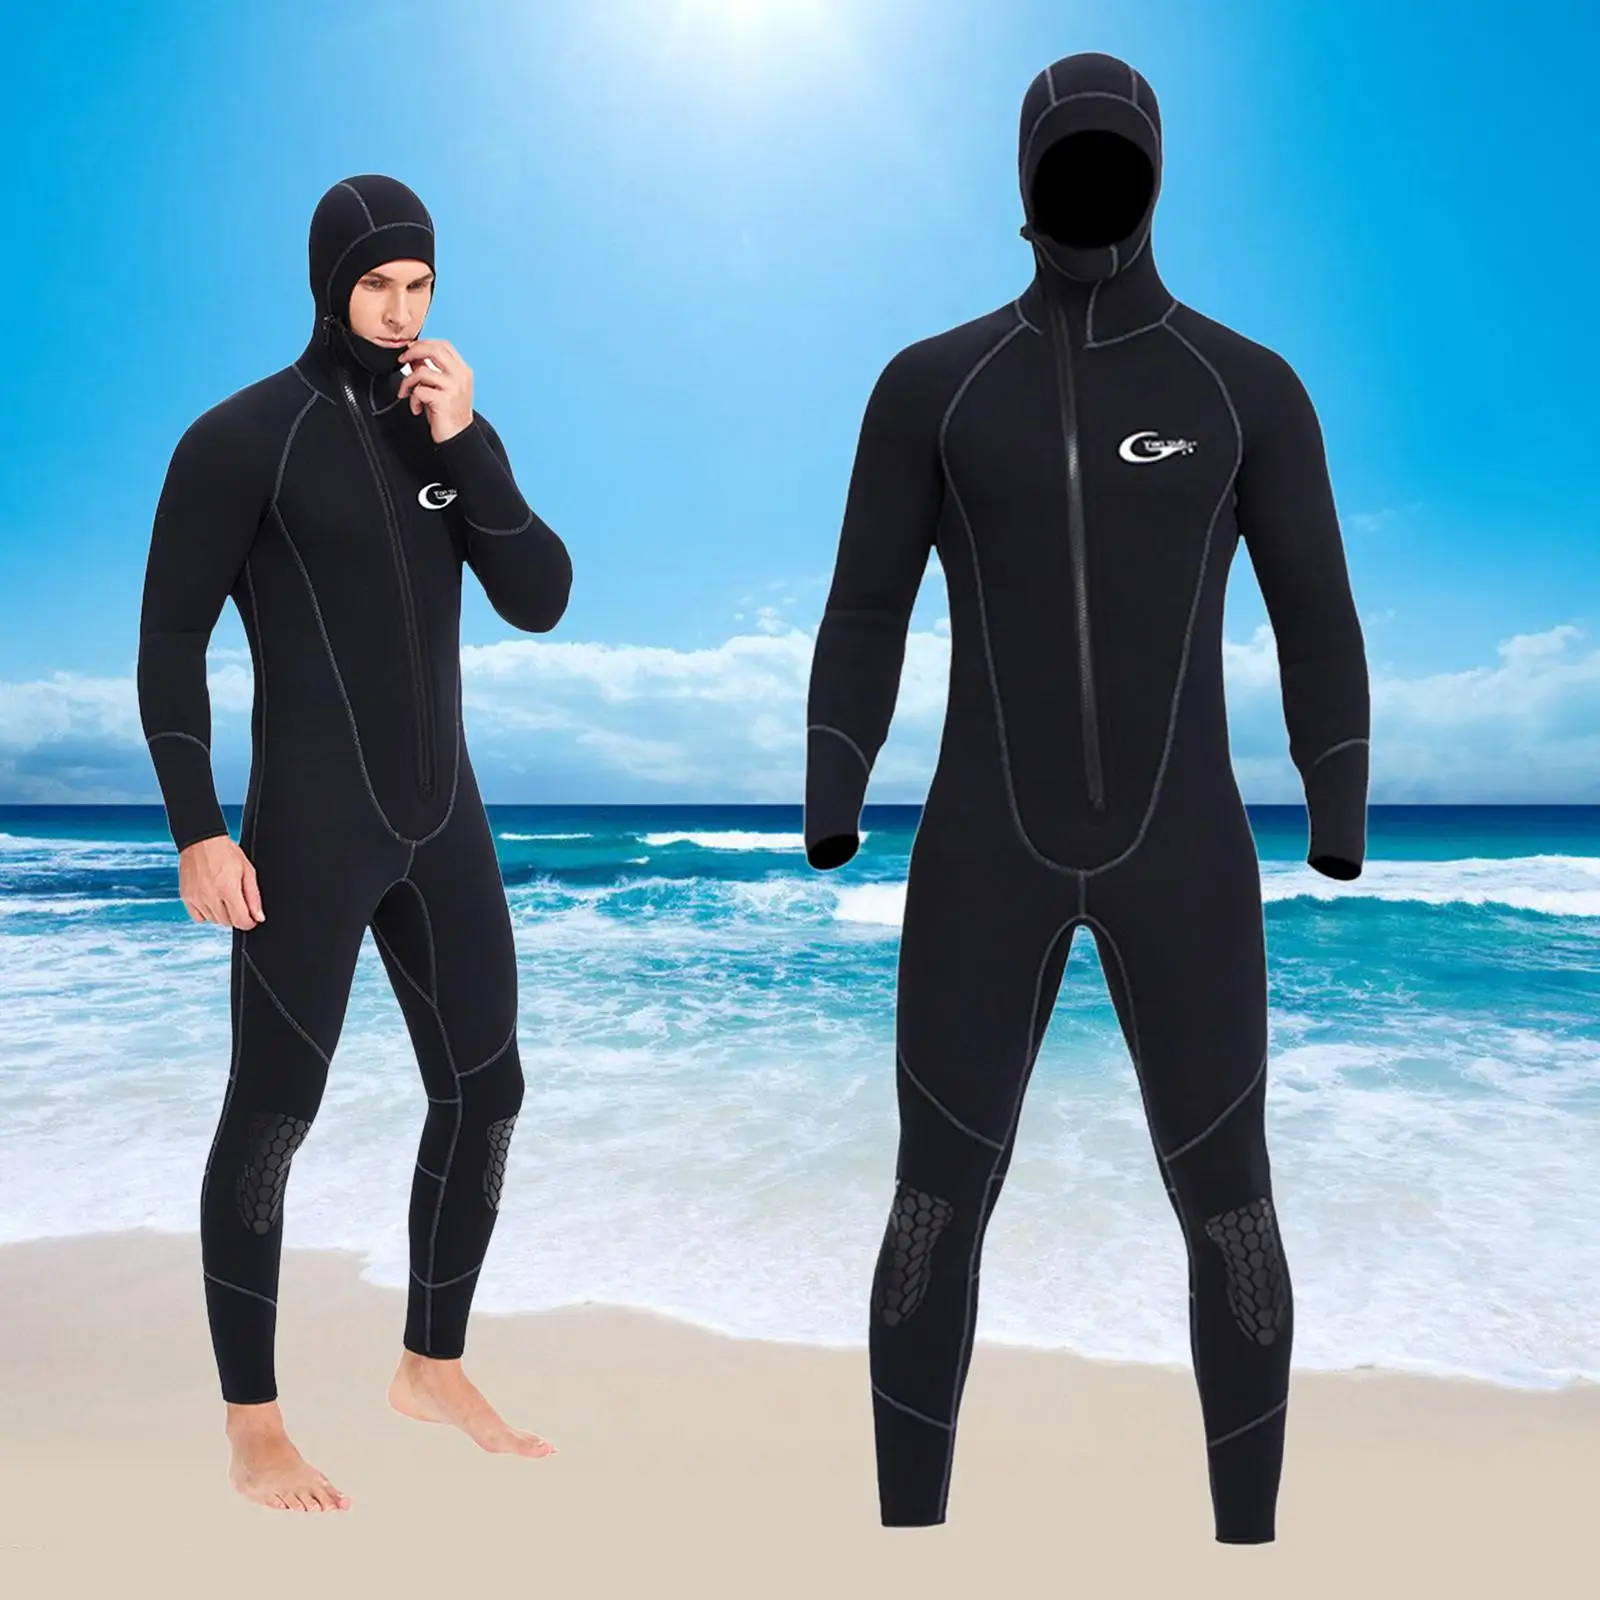 Hooded 7mm Neoprene Swetsuits Long Sleeve Wet Suit Swimsuit Diving Wetsuits Jumpsuit for Scuba Diving Swimming Kayaking